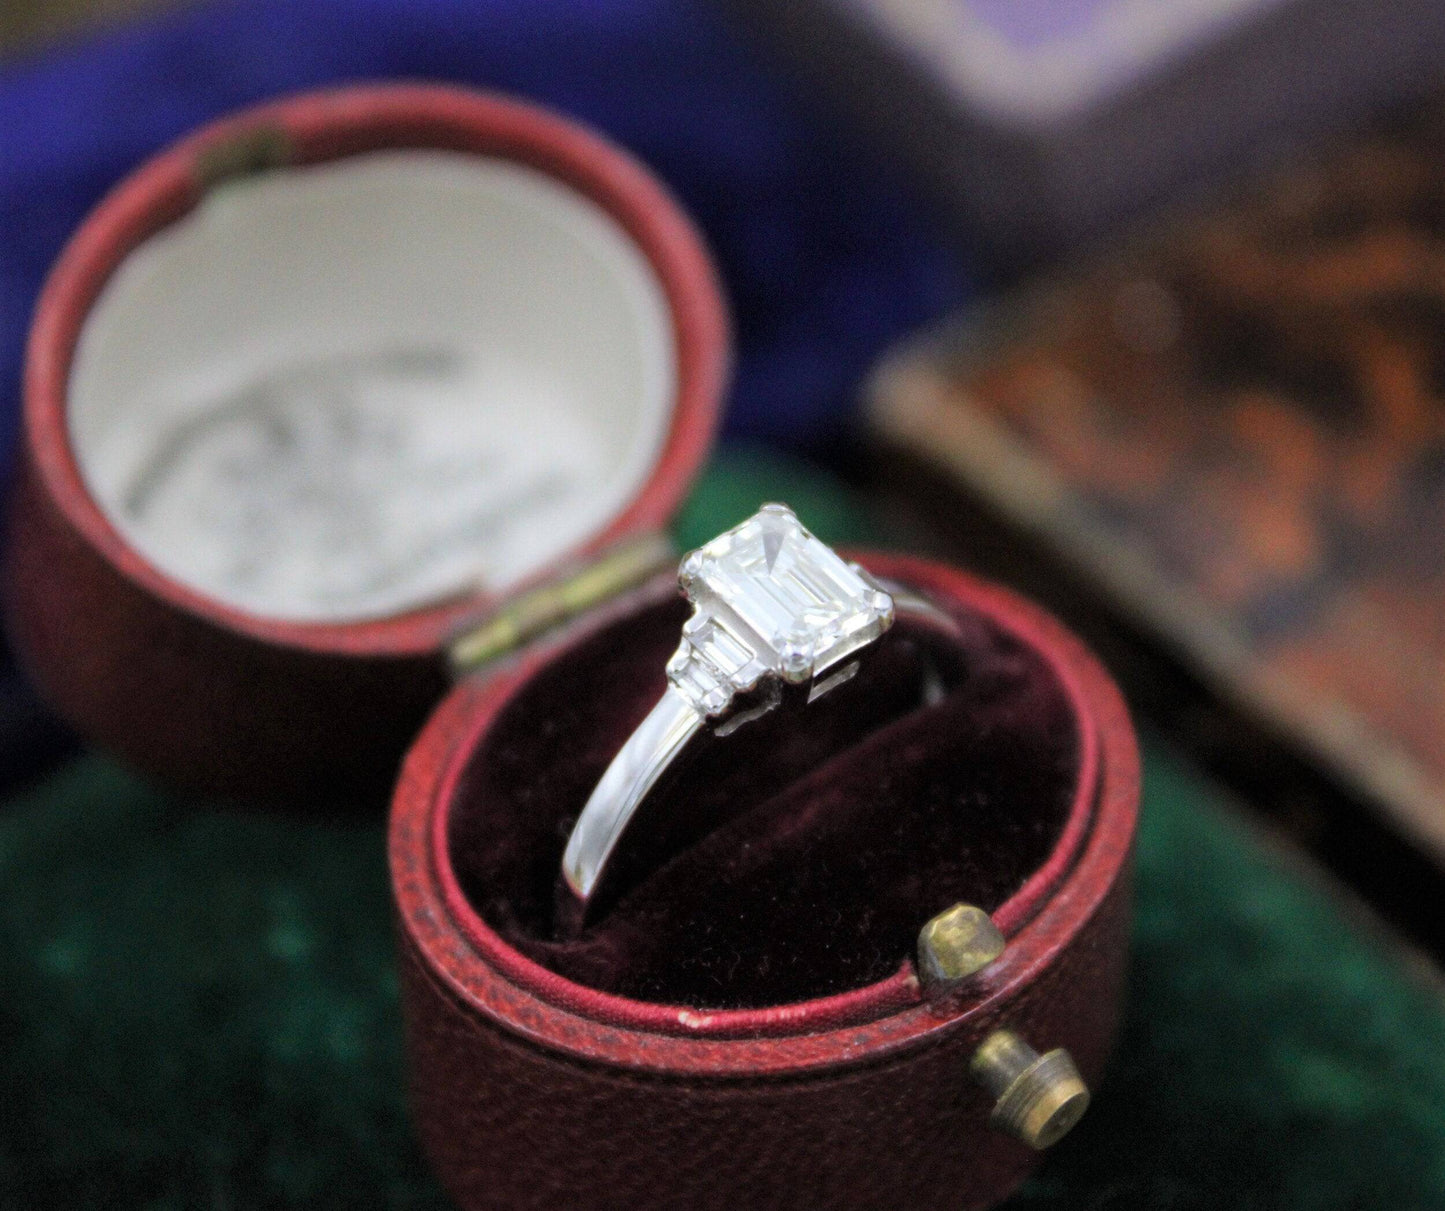 A very fine Emerald Cut Diamond Ring with Baguette Cut Stepped Shoulders set in 18ct White Gold, Pre-owned - Robin Haydock Antiques